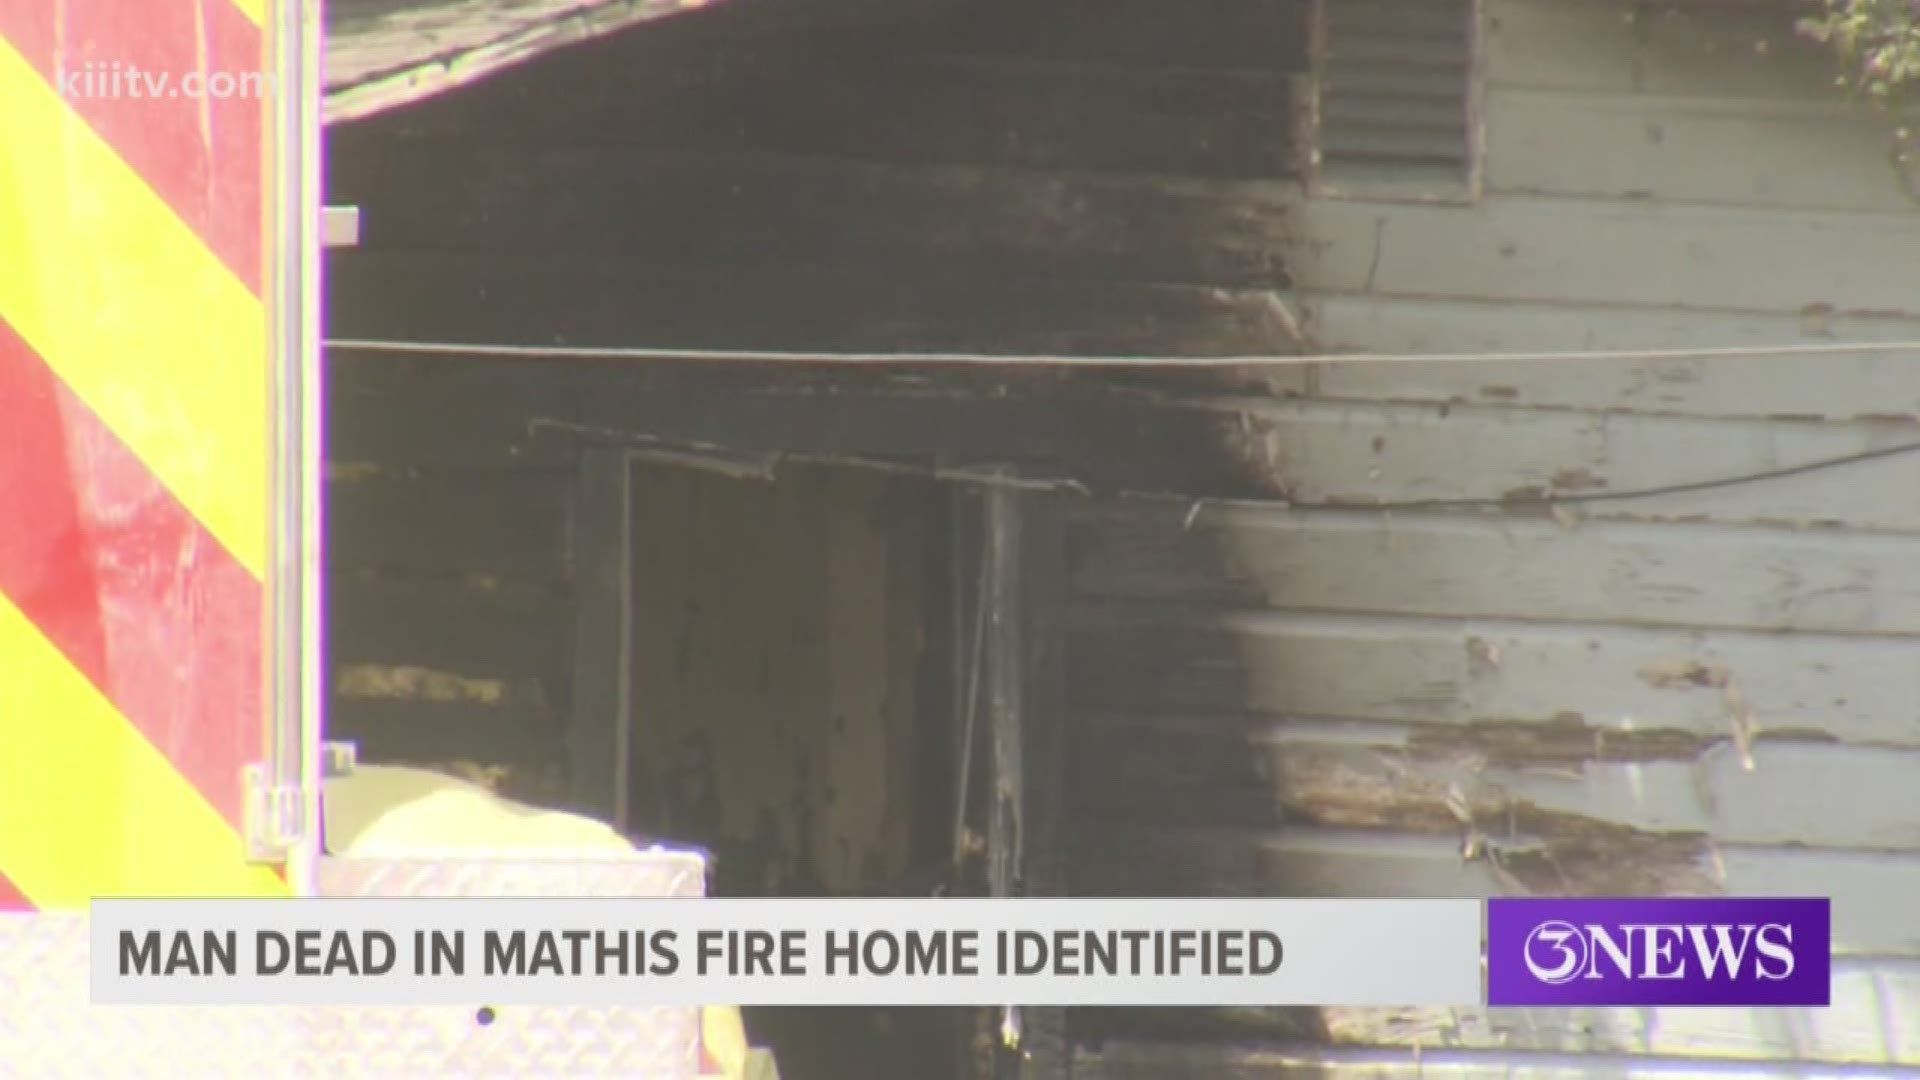 Authorities have identified a blind man who was killed in a house fire in Mathis, Texas, Saturday as 61-year-old Raul Gutierrez.